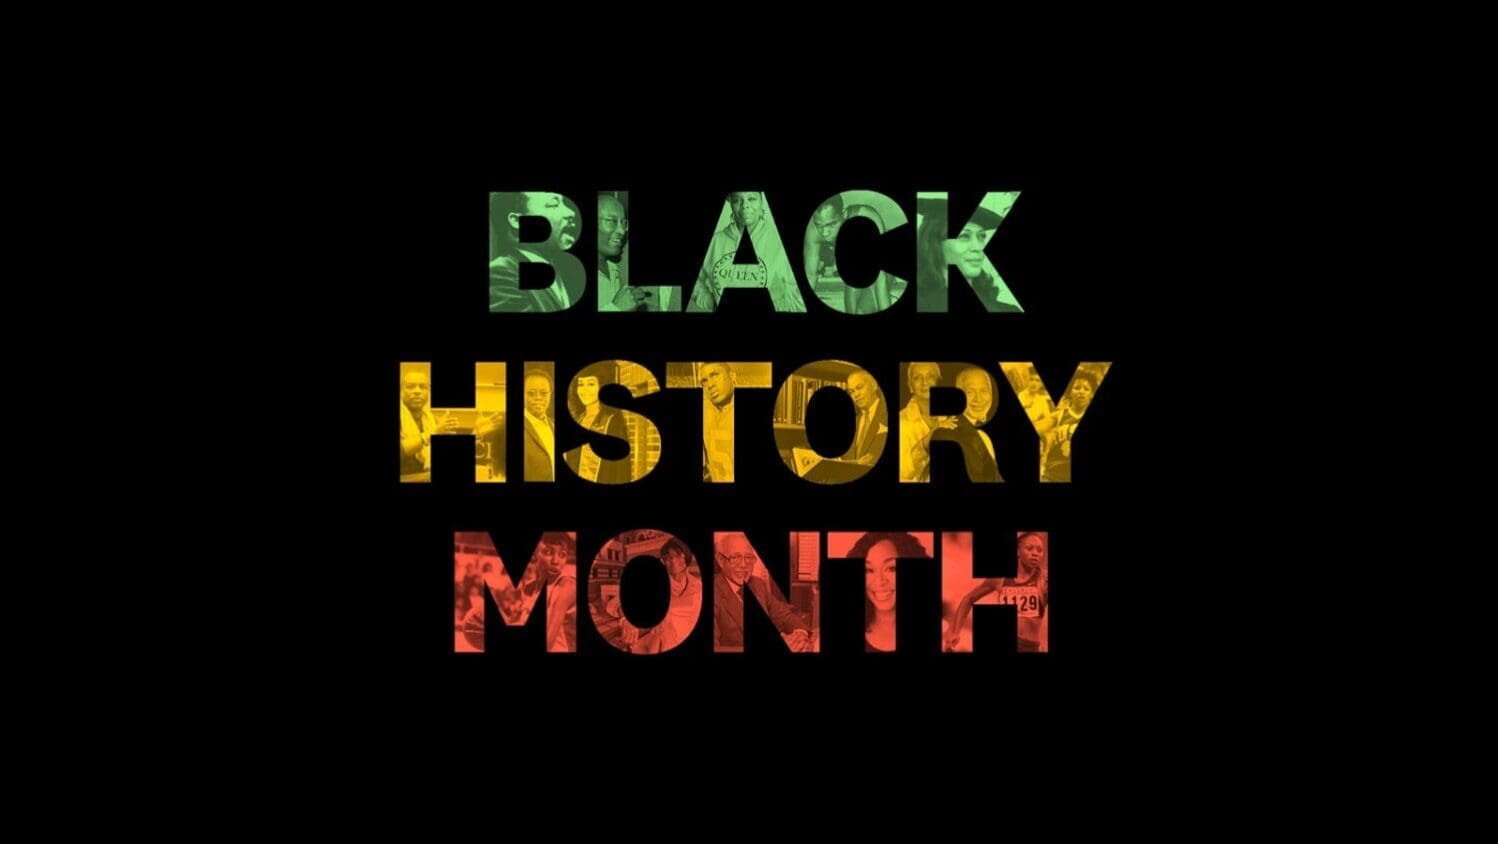 Black History Month graphic in red, yellow, and green